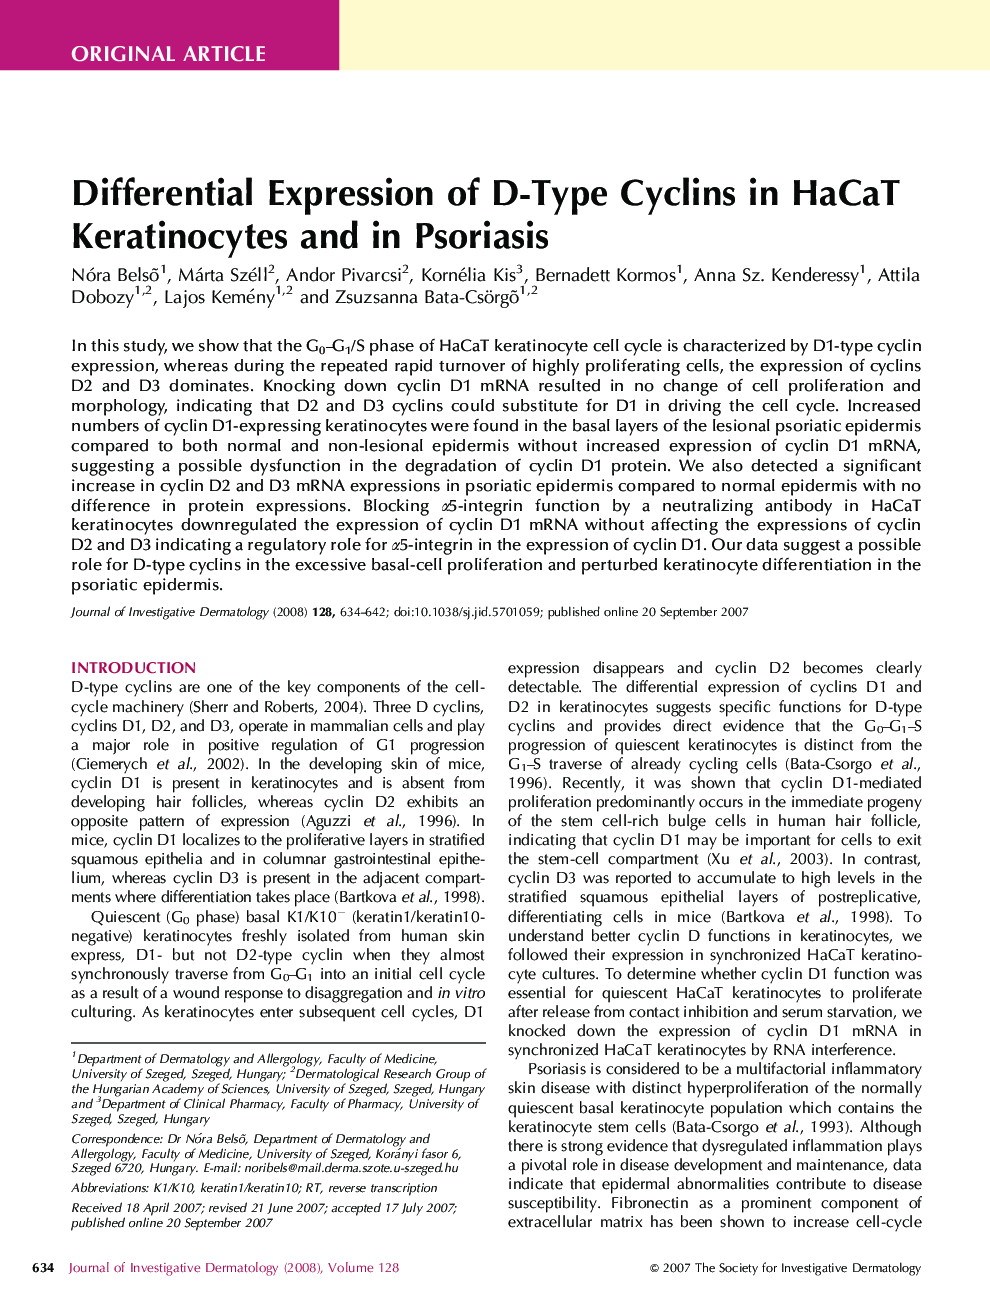 Differential Expression of D-Type Cyclins in HaCaT Keratinocytes and in Psoriasis